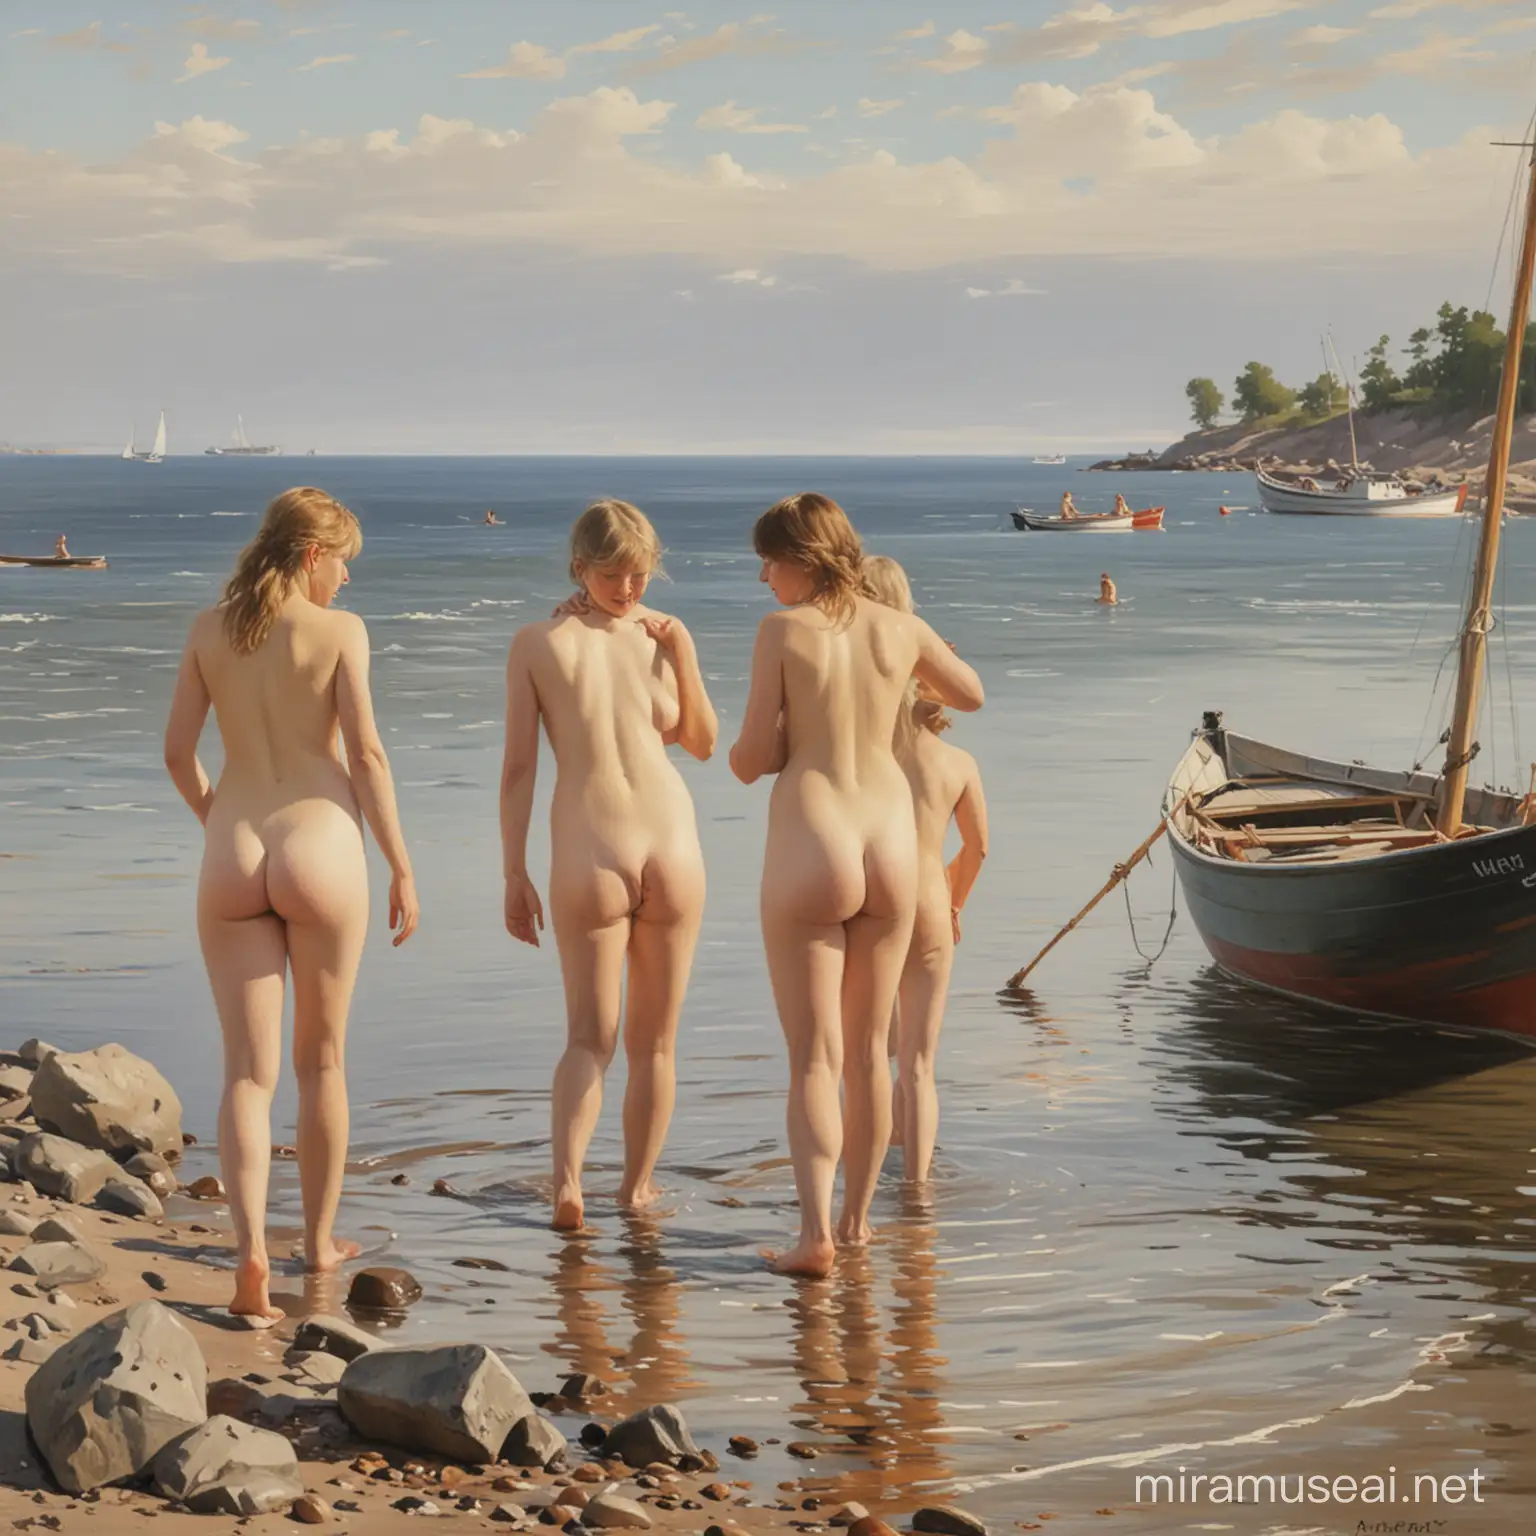 Naked Girls Bathing on Shore in Anders Zorn Style with Distant Boats